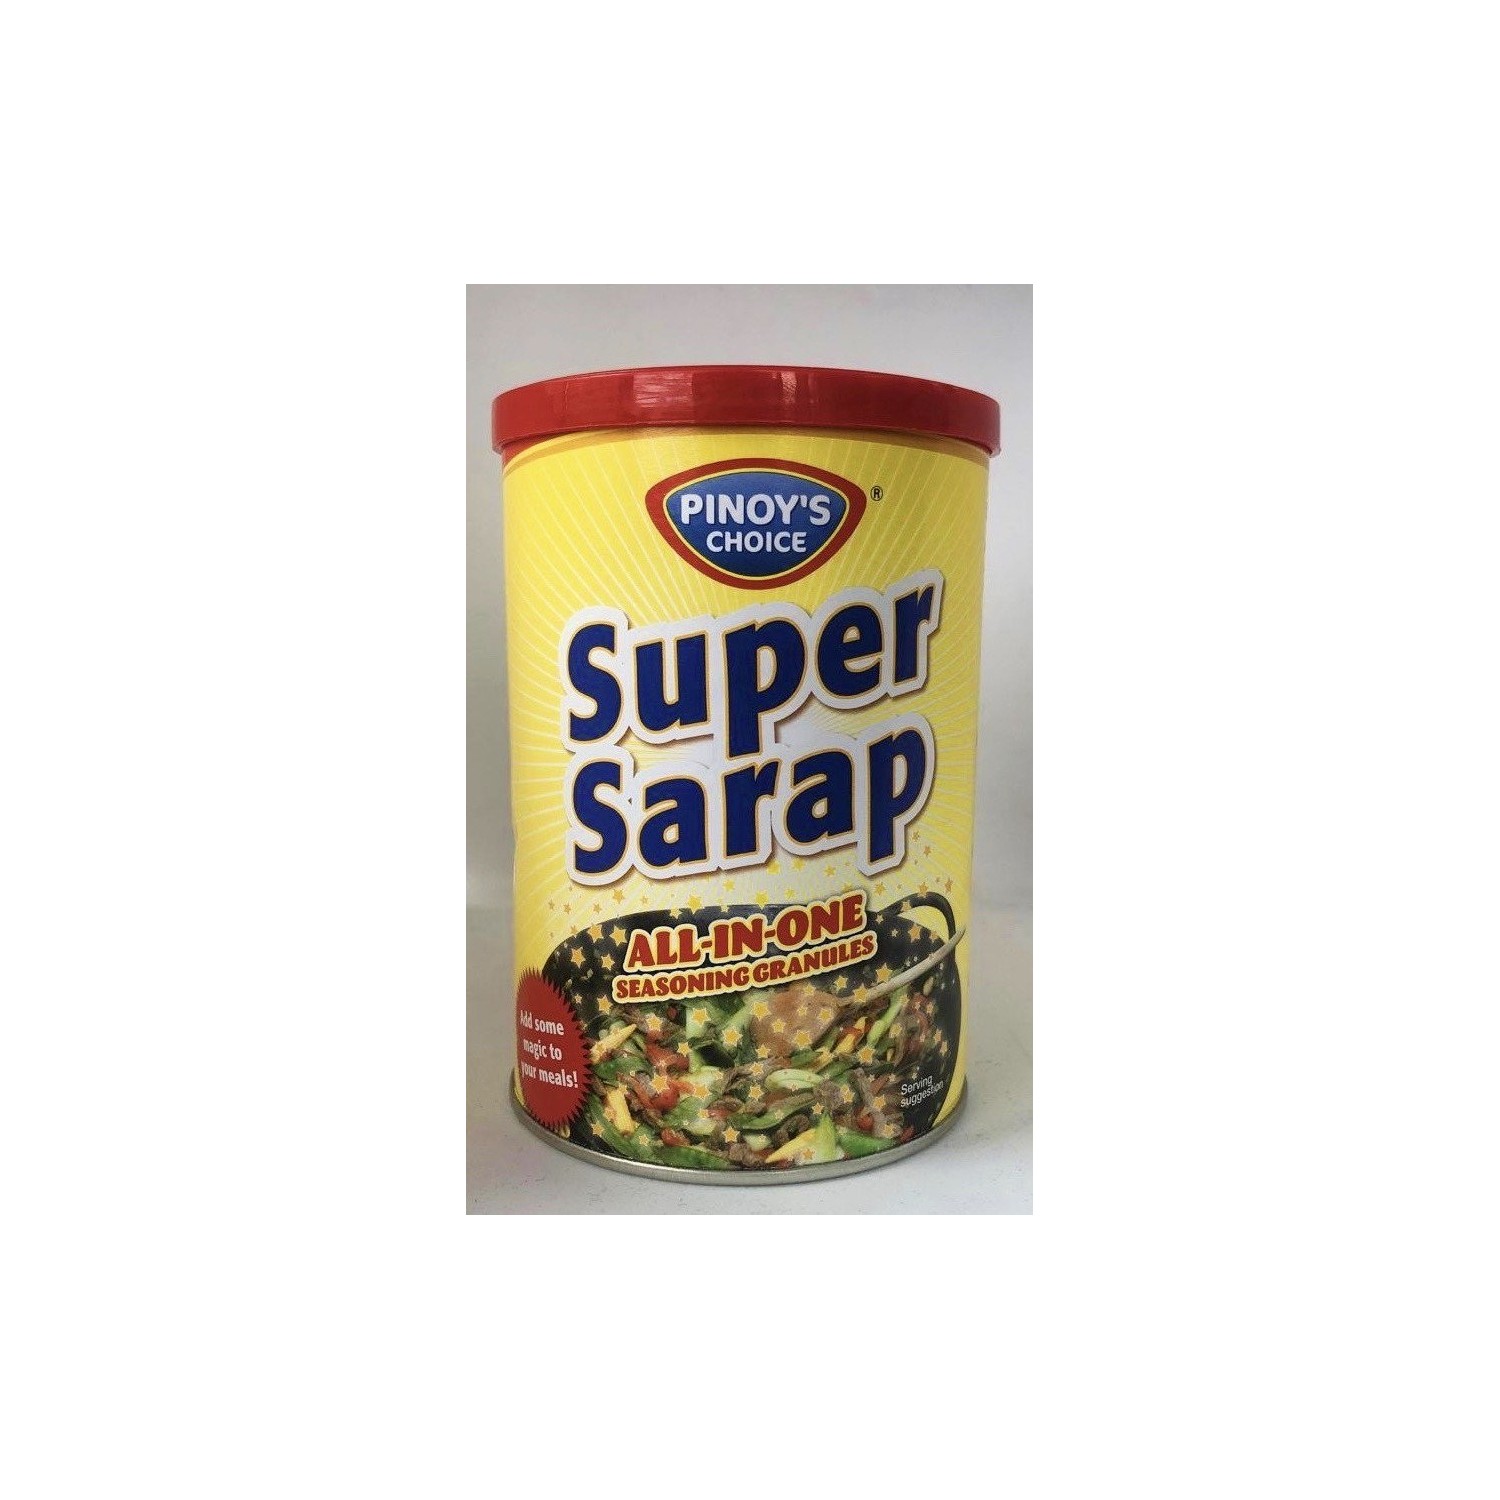 Pinoy's Choice Super Sarap 200g all-in-one seasoning granules